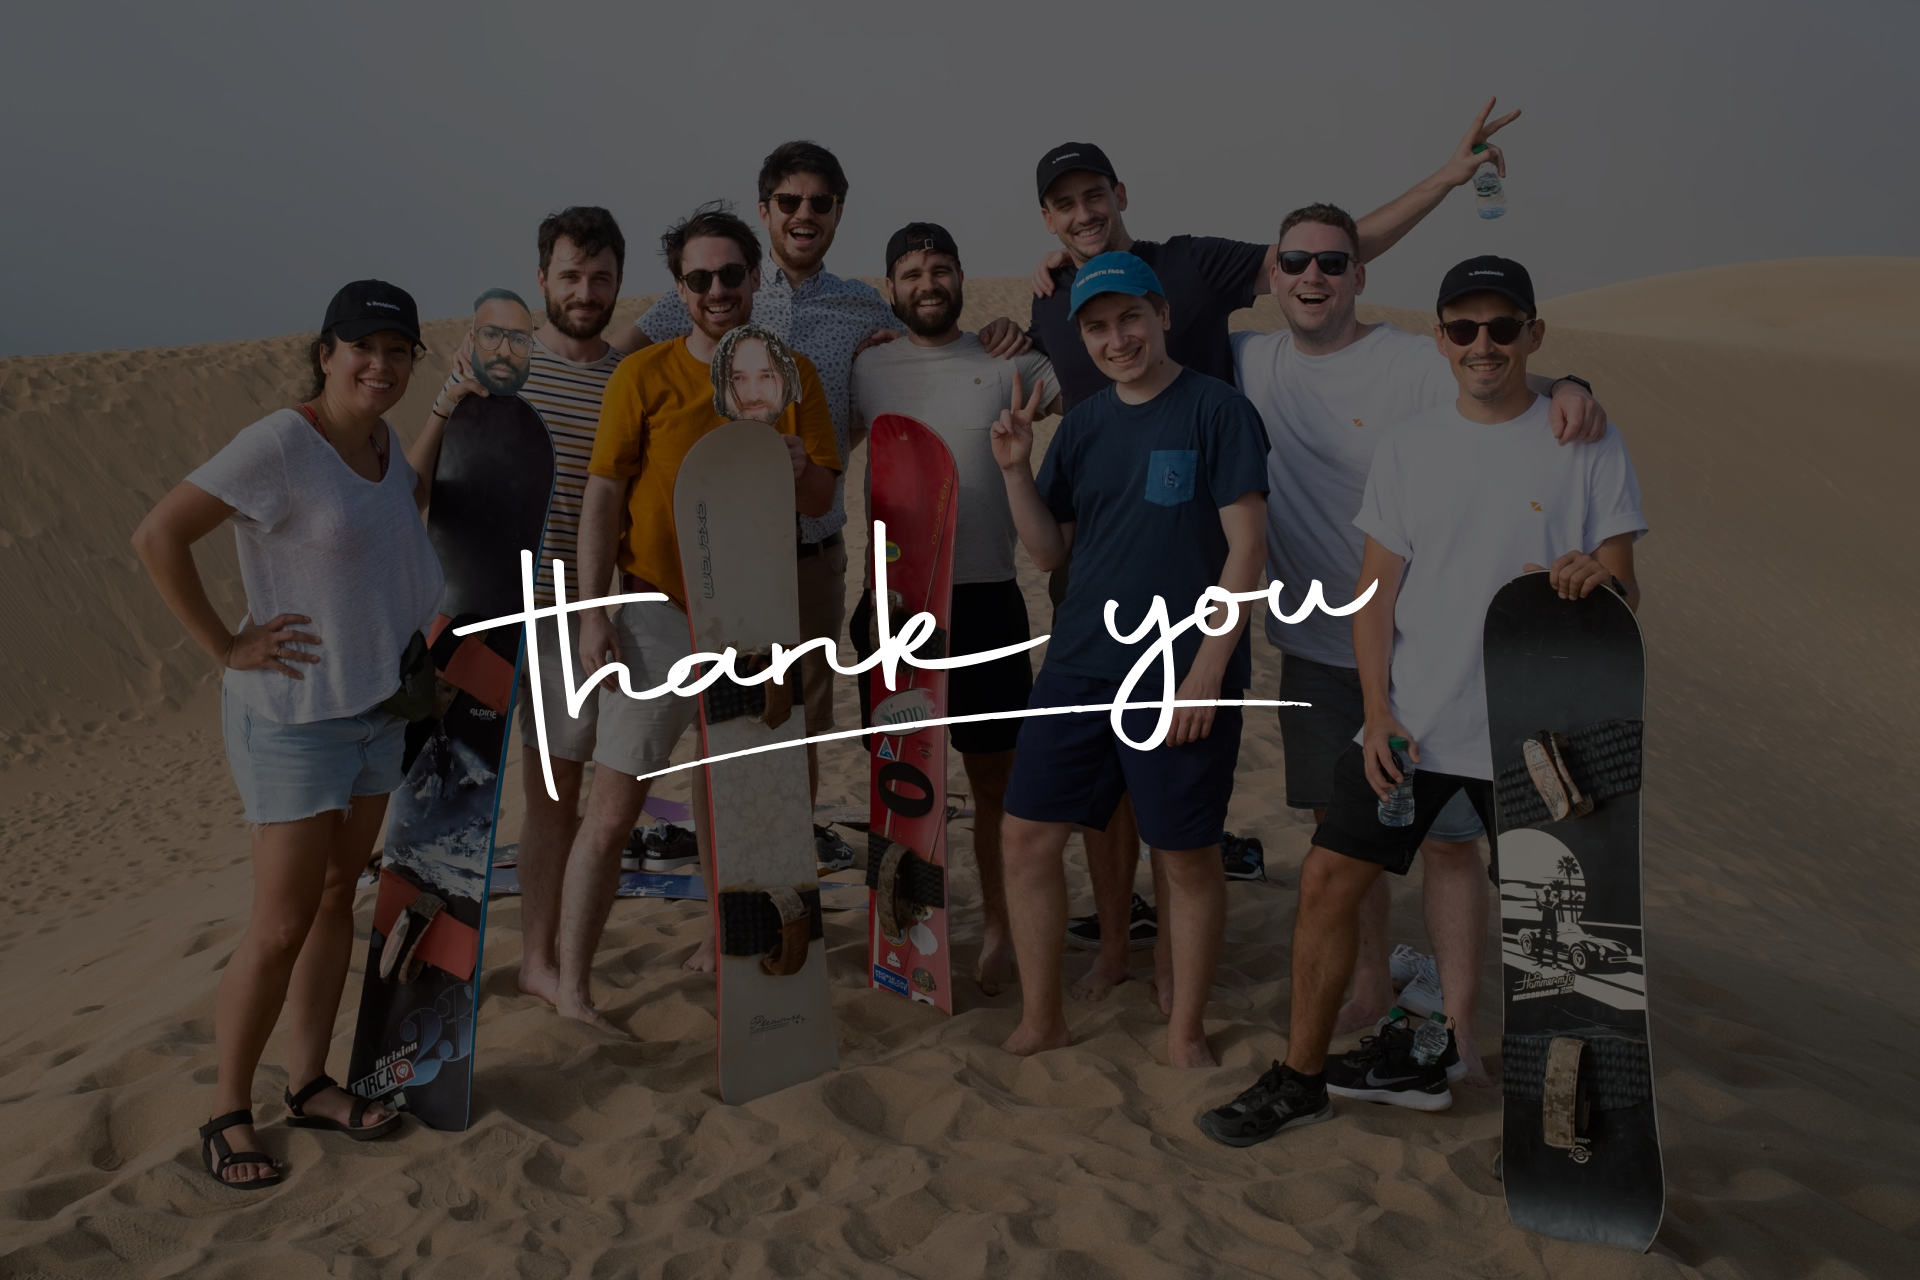 Thank you from the Liveblocks team